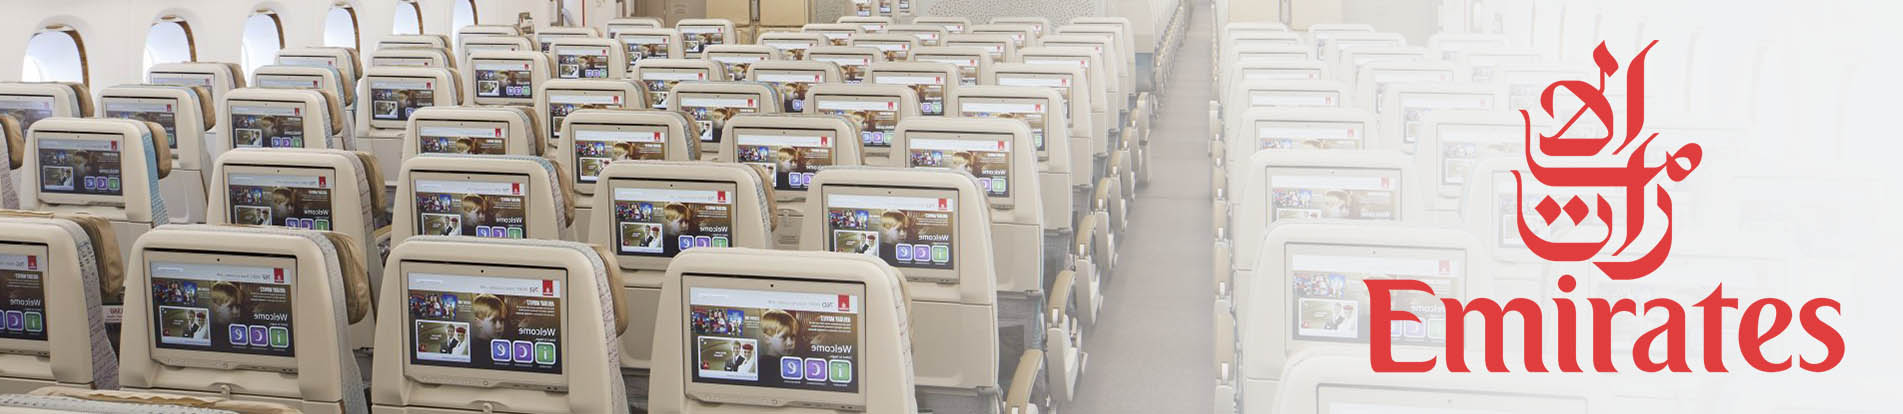 HOW TO BOOK EMIRATES FLIGHT TICKETS?